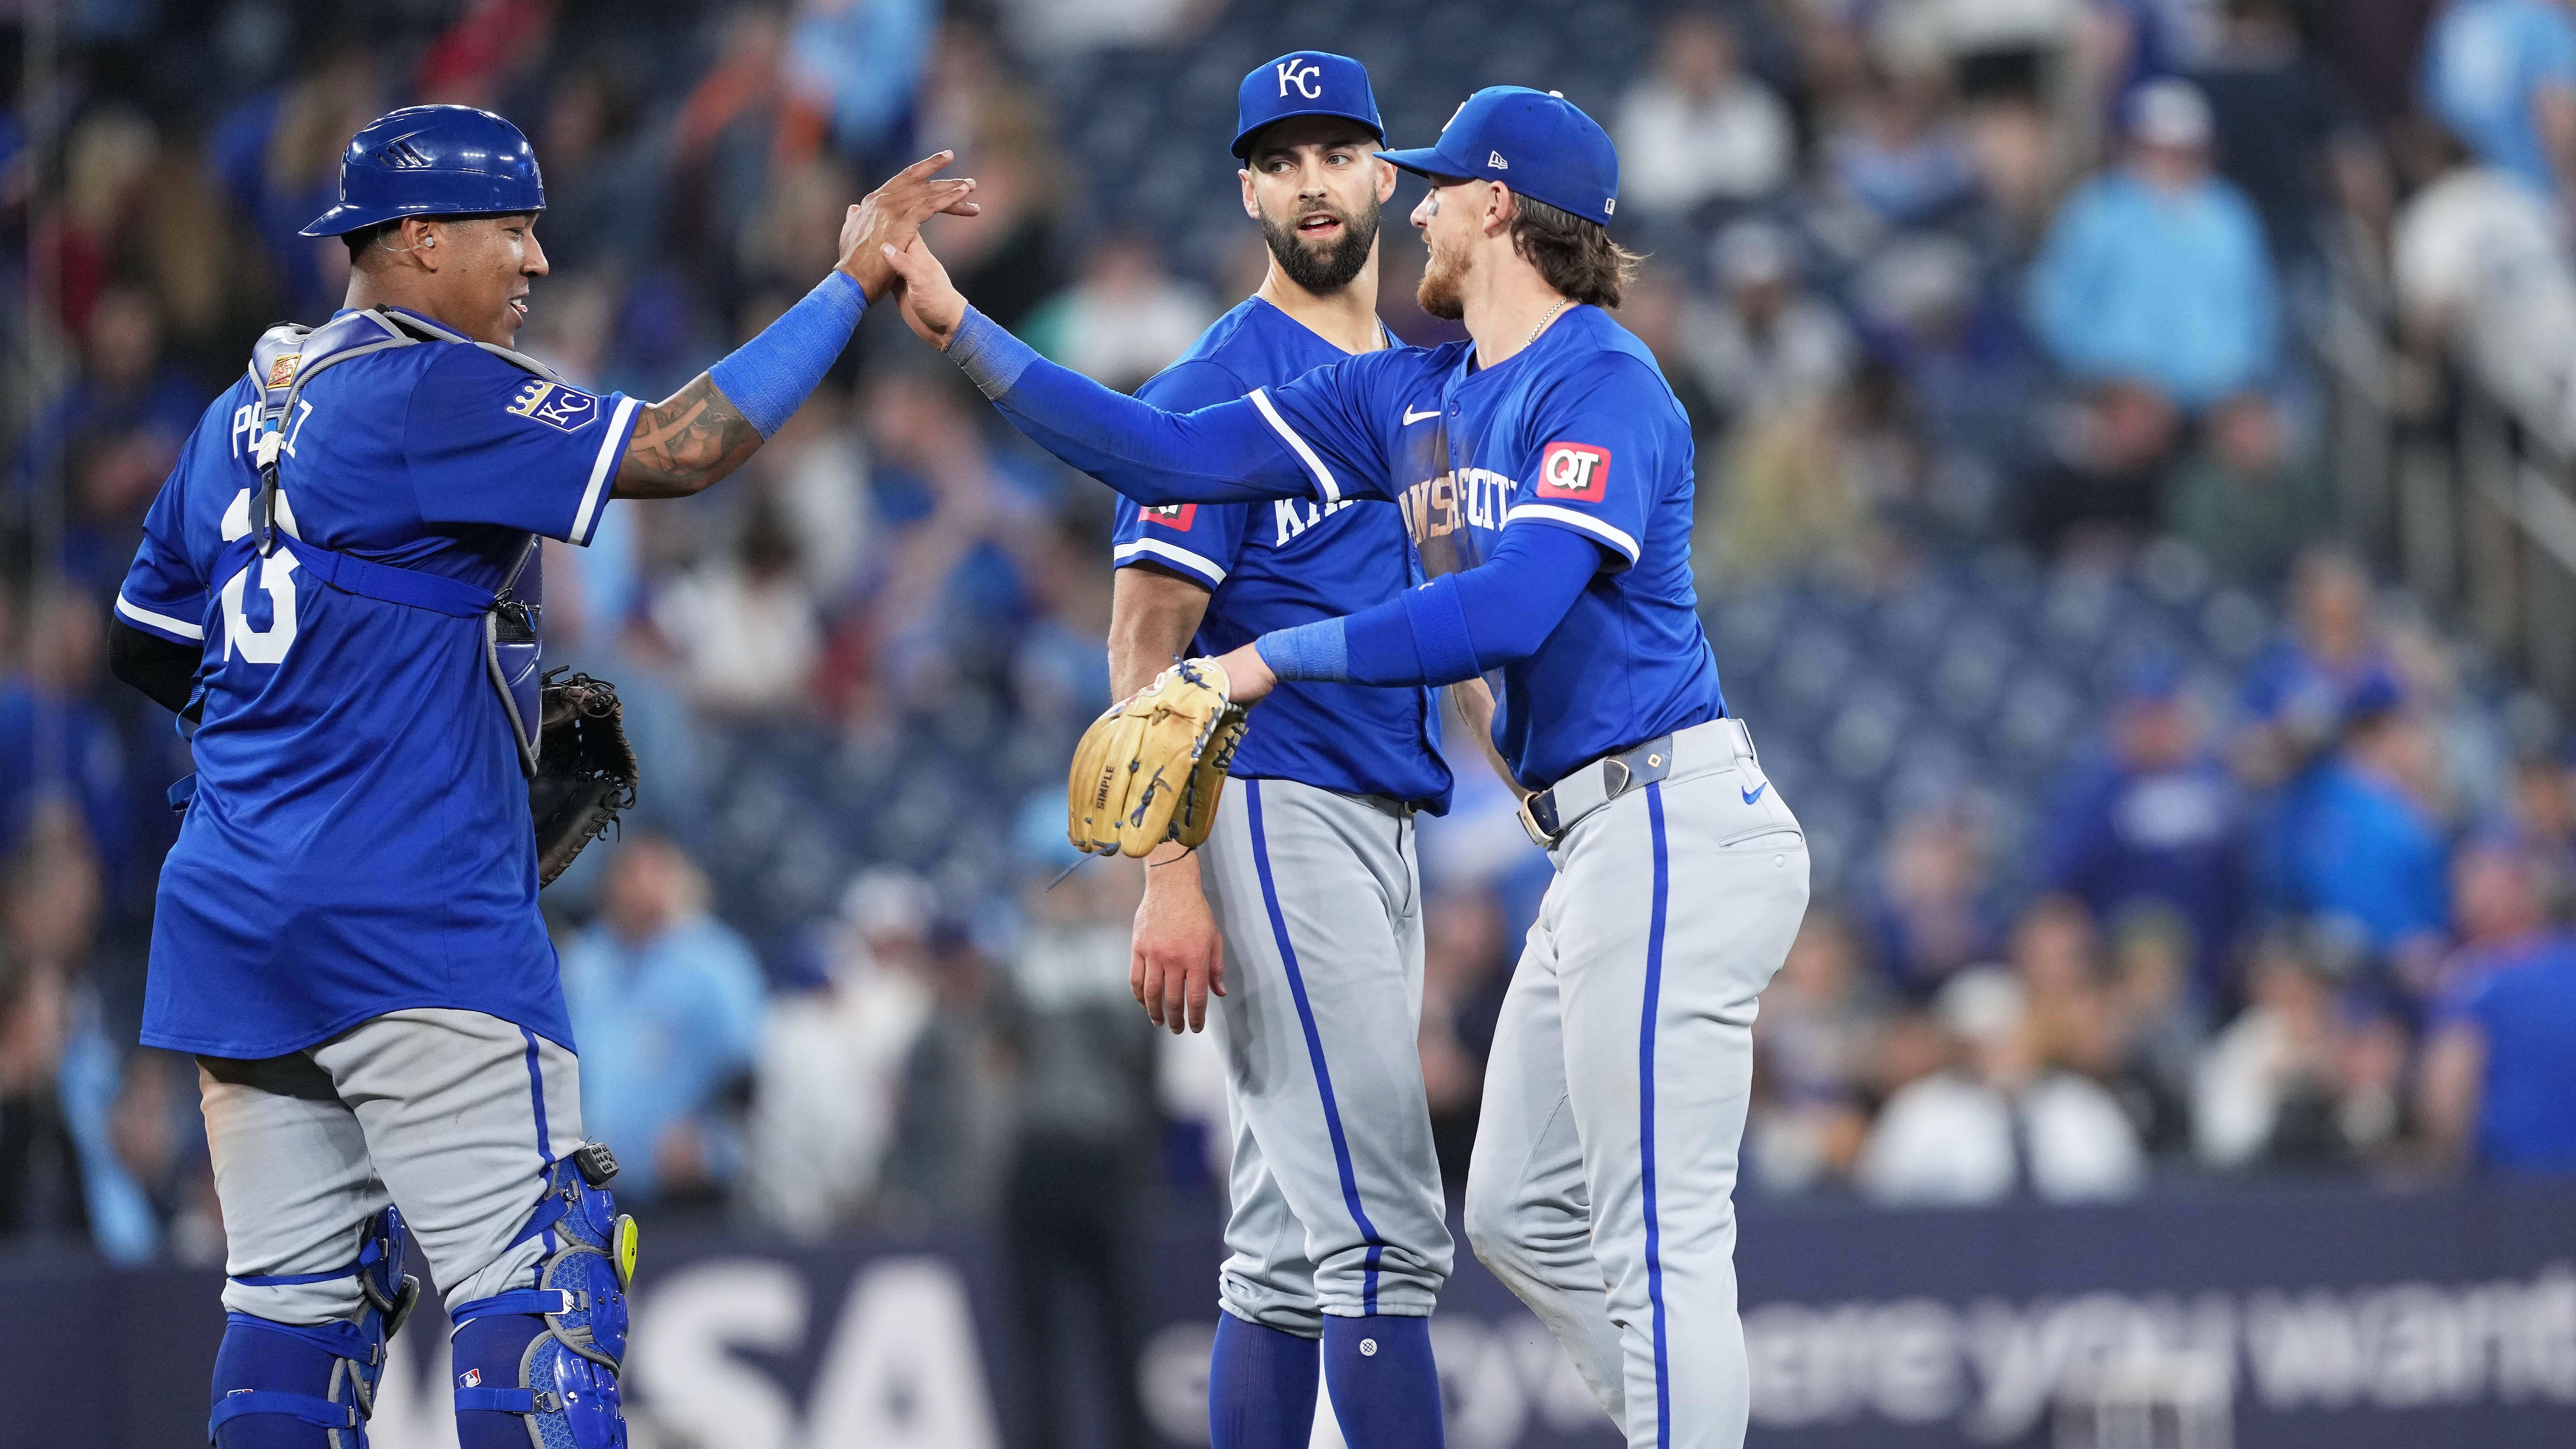 The Royals Express, Friday, May 3: Royals Begin Their Home Stand